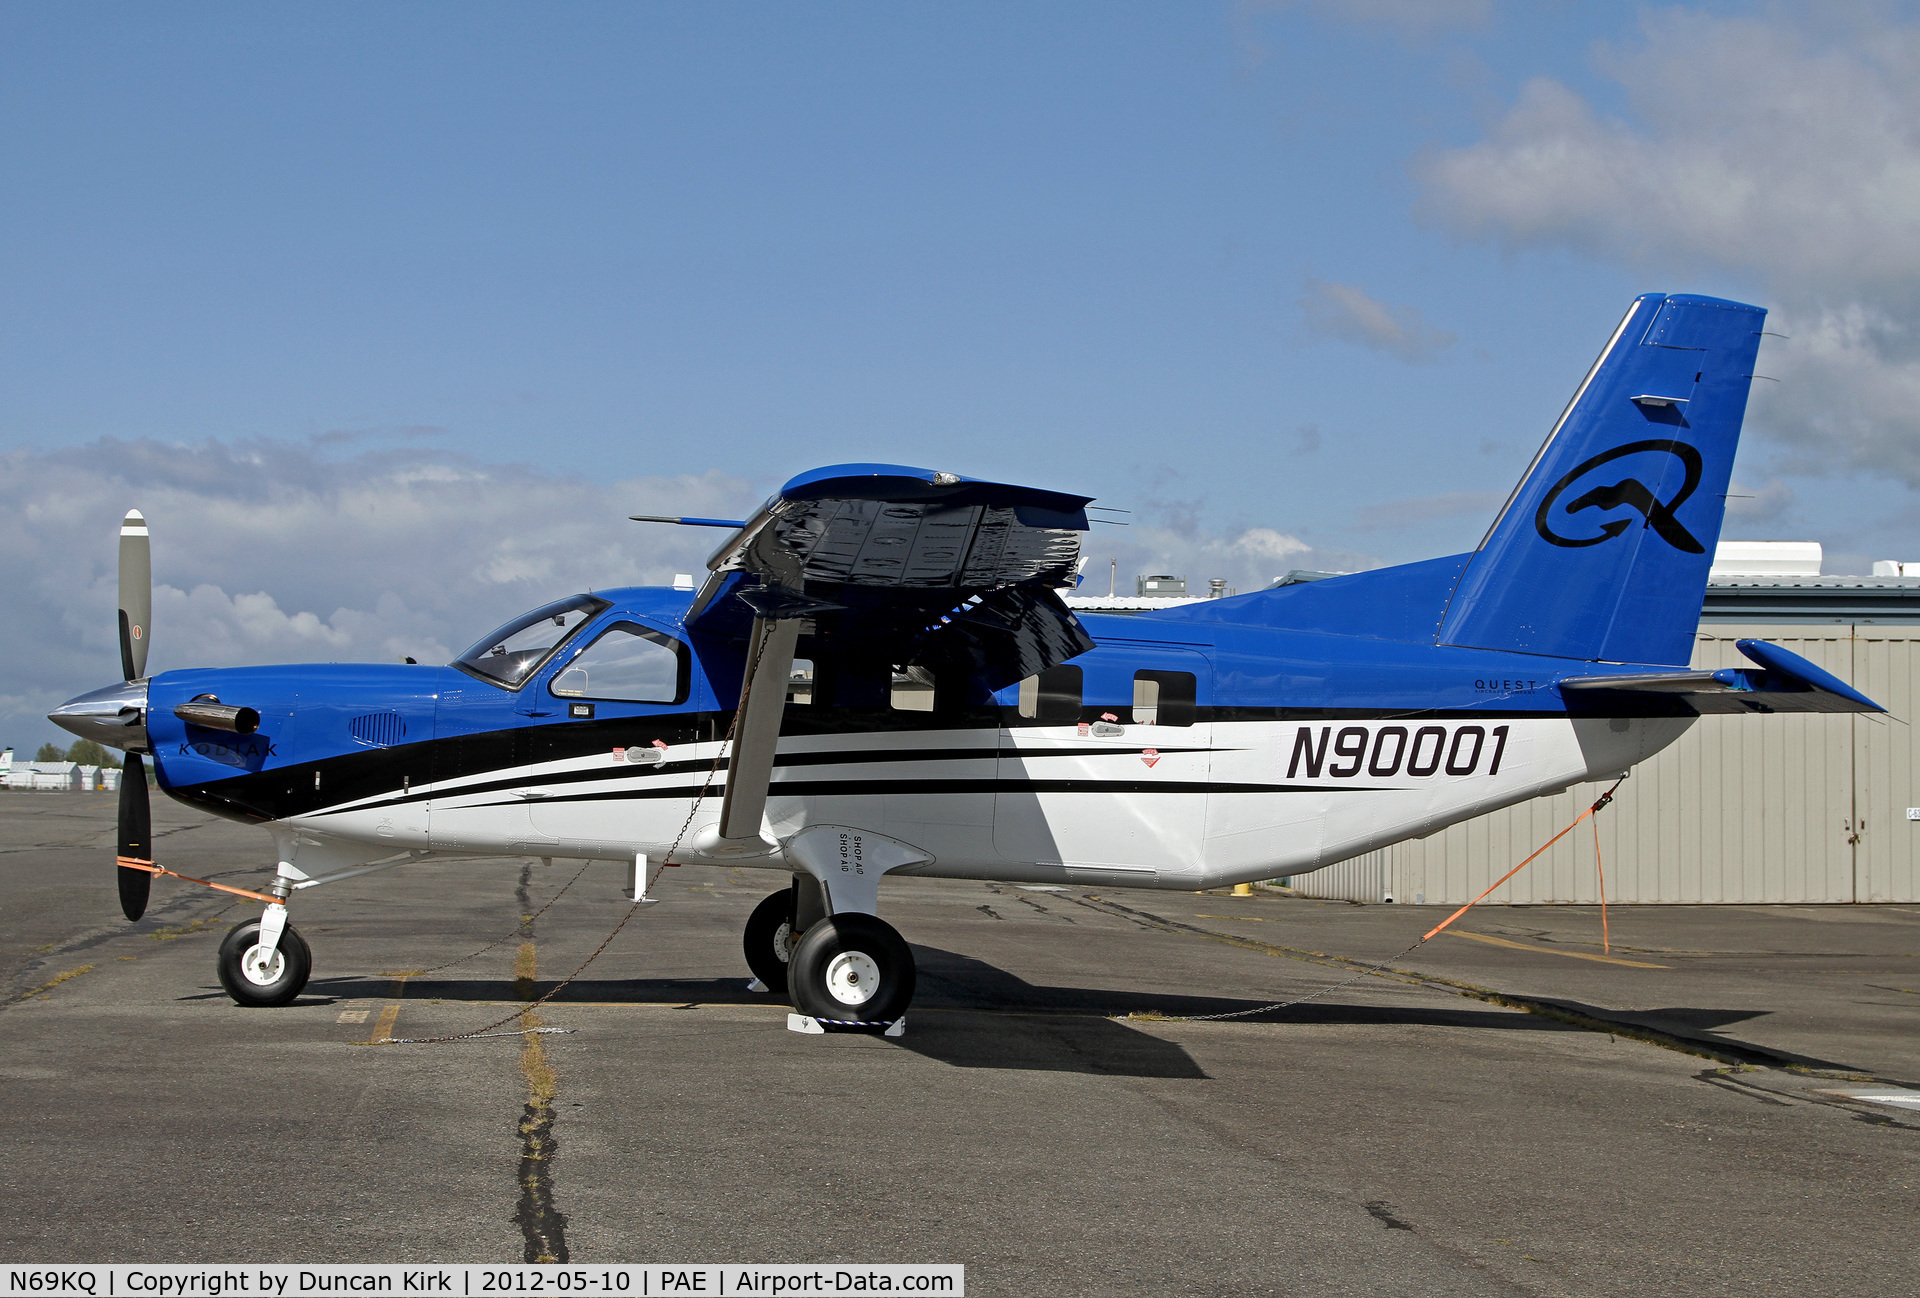 N69KQ, 2012 Quest Kodiak 100 C/N 100-0069, Fresh out of paint N69KQ wears ferry registration N90001 to fly back to Idaho.